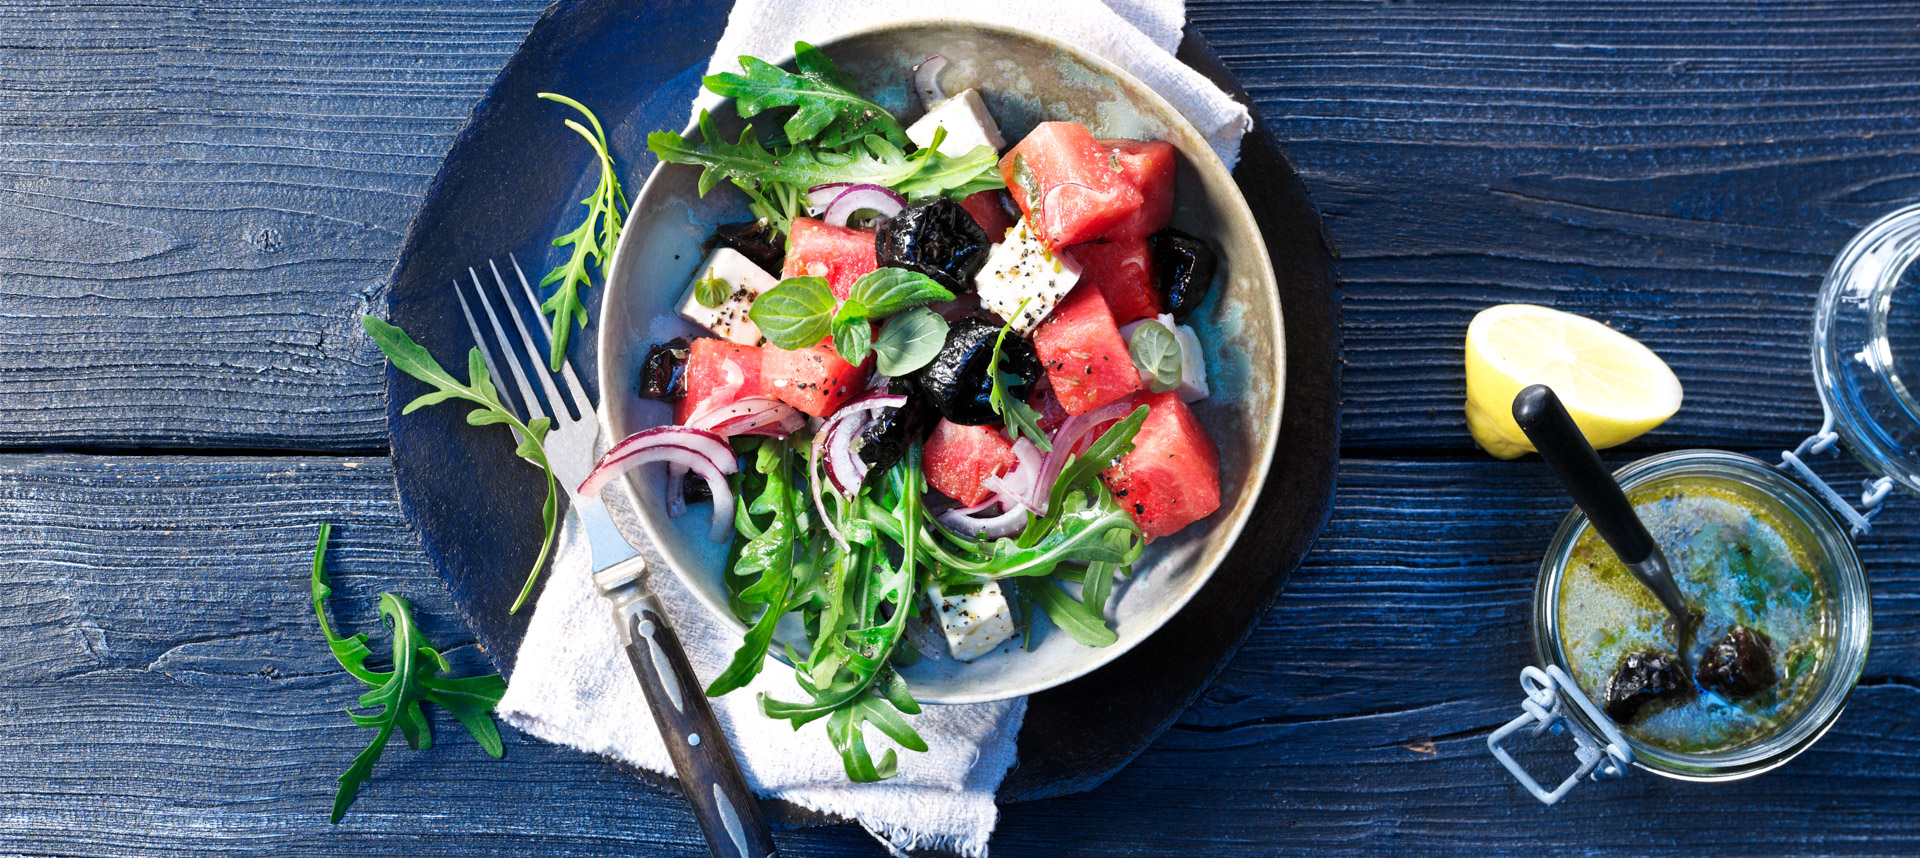 weet, juicy watermelon with salty, tangy feta makes for a perfect salad. For added texture and mild sweetness, add in a handful of Diced Prunes.